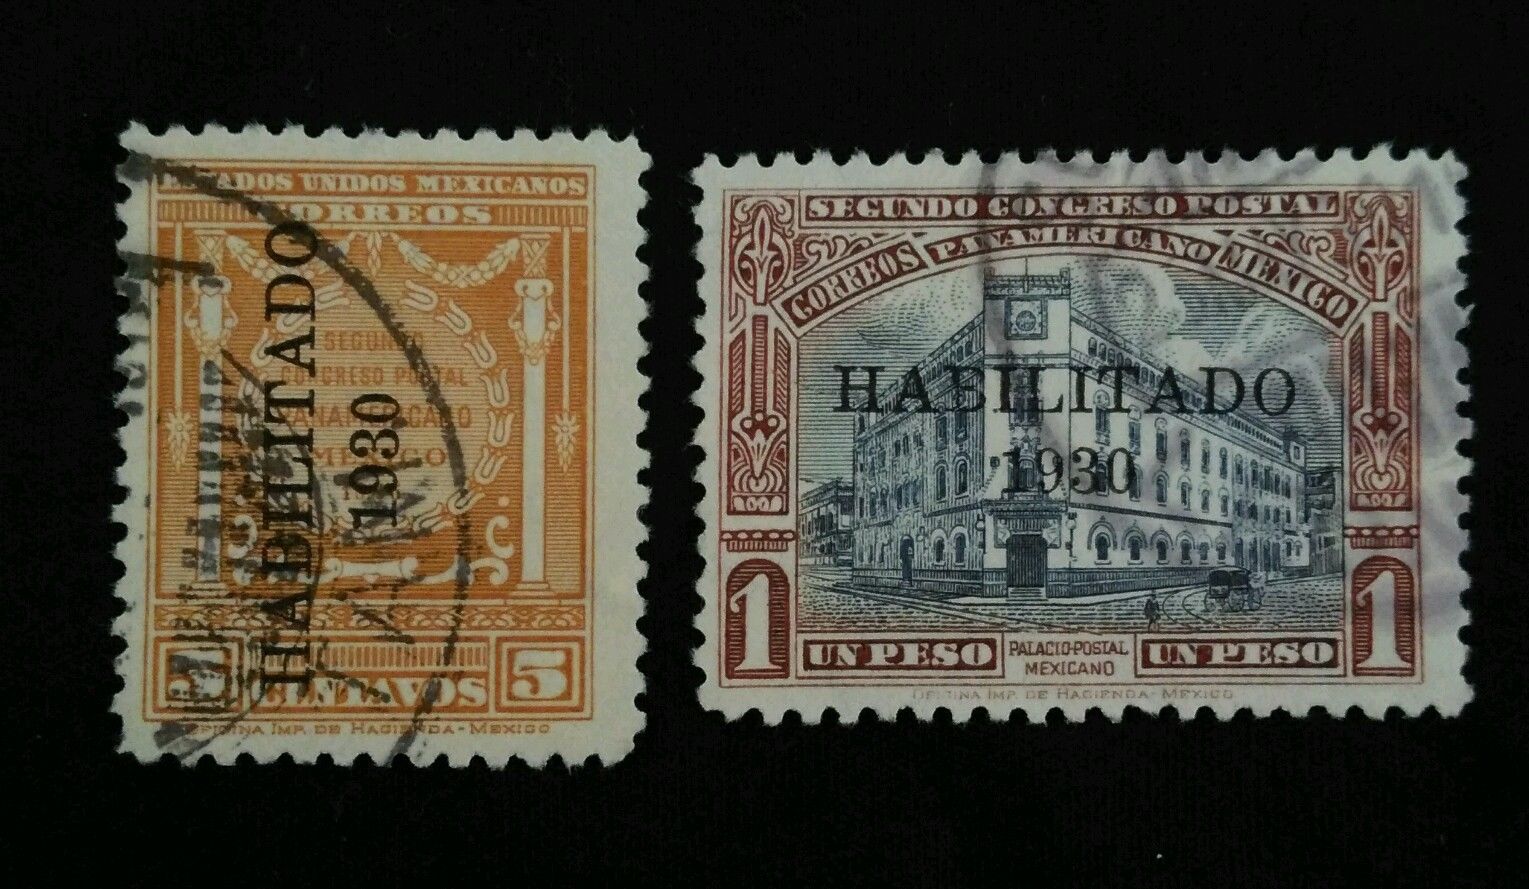 Mexico Stamp, Set of two, Scott #677 & #682, 5¢&1$, Used